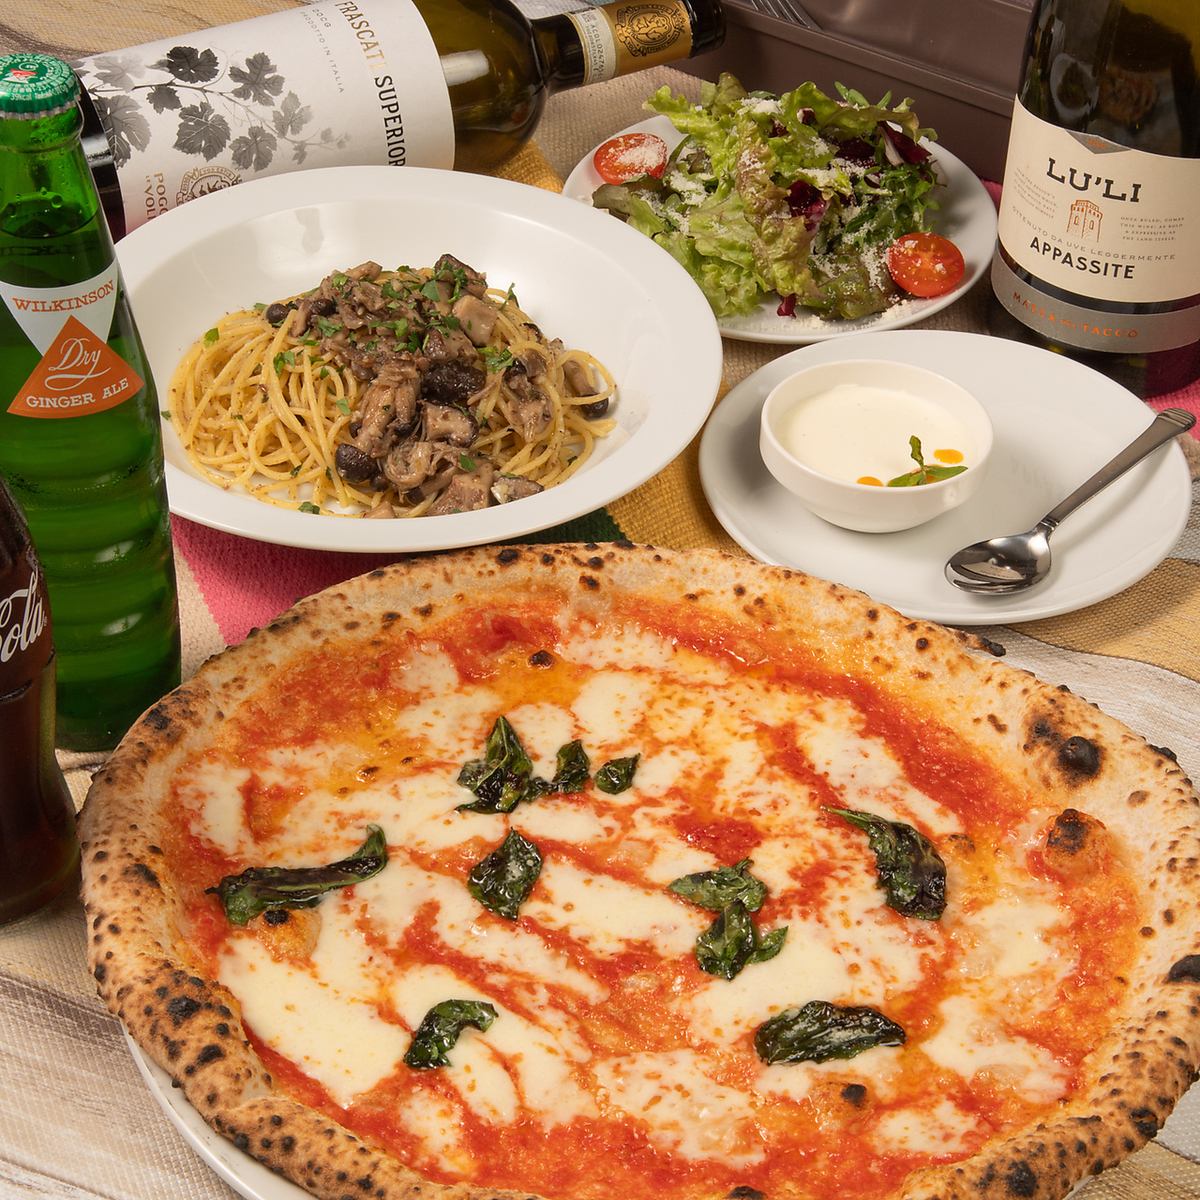 Authentic Neapolitan pizza to enjoy in a monochrome, calm and extraordinary space.